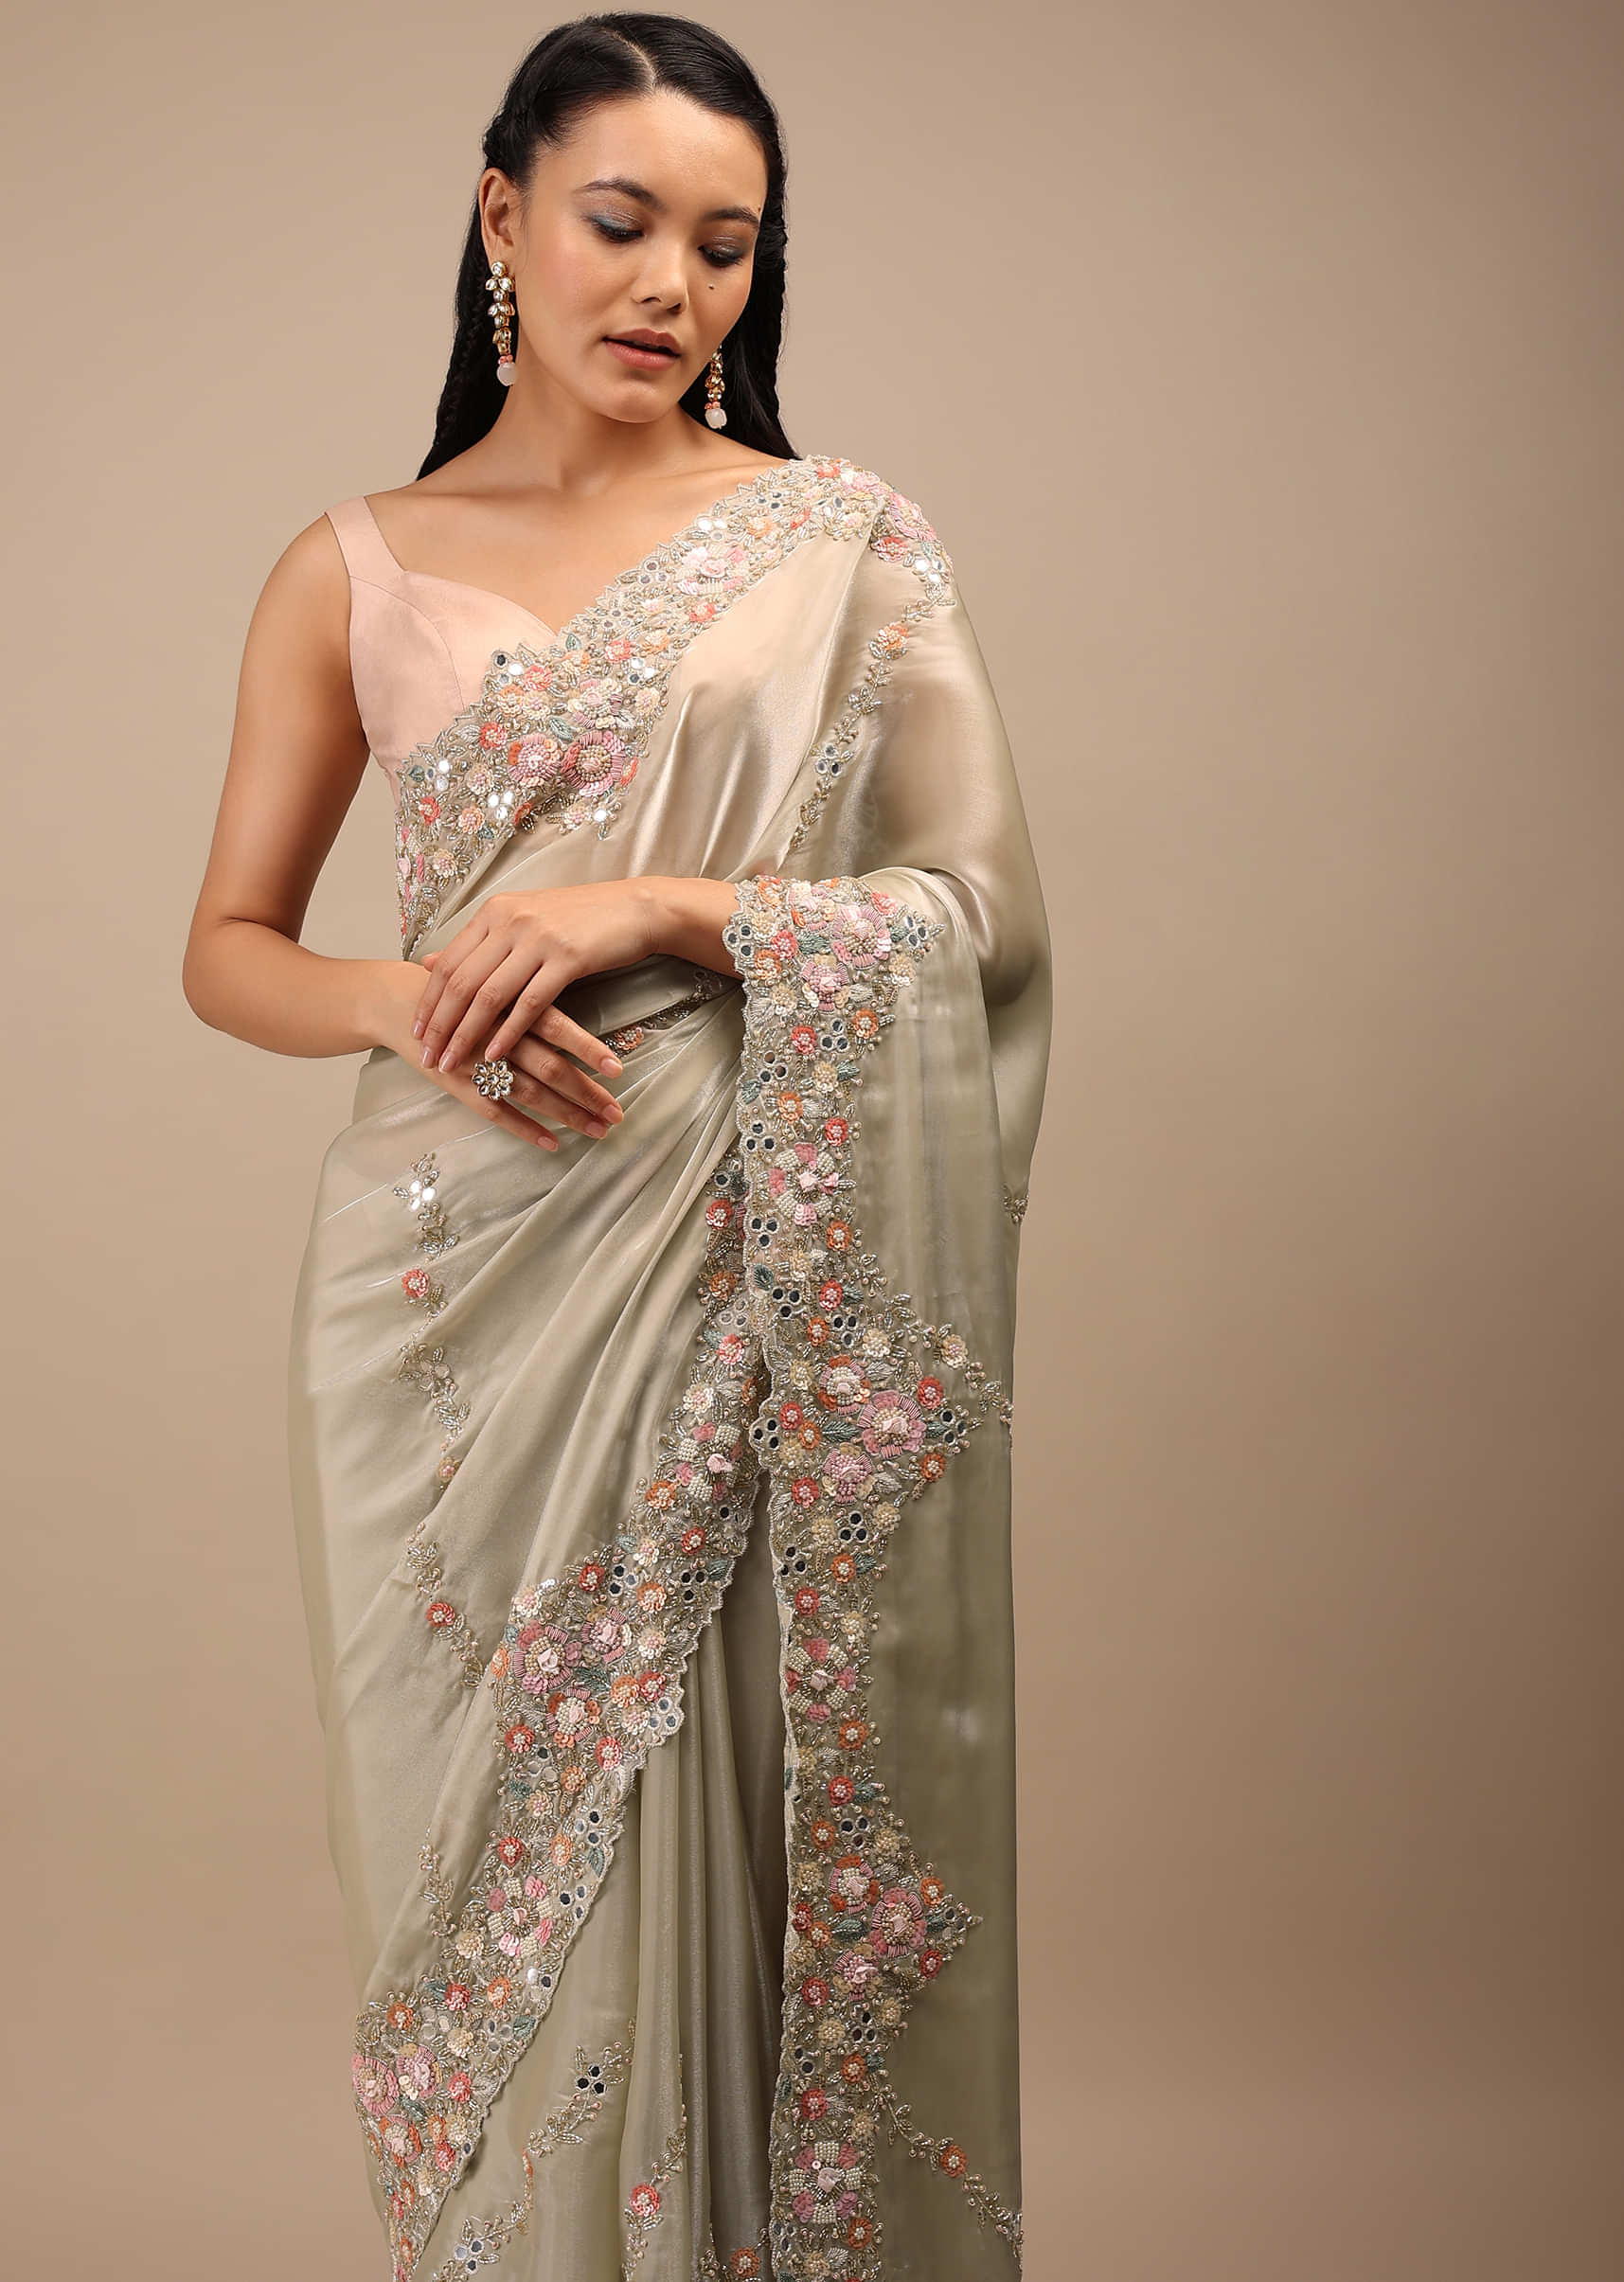 Eucalyptus Grey Glass Silk Saree In 3D Floral Motifs On The Border, Embroidered Border In Multi-Color Sequins And Lace